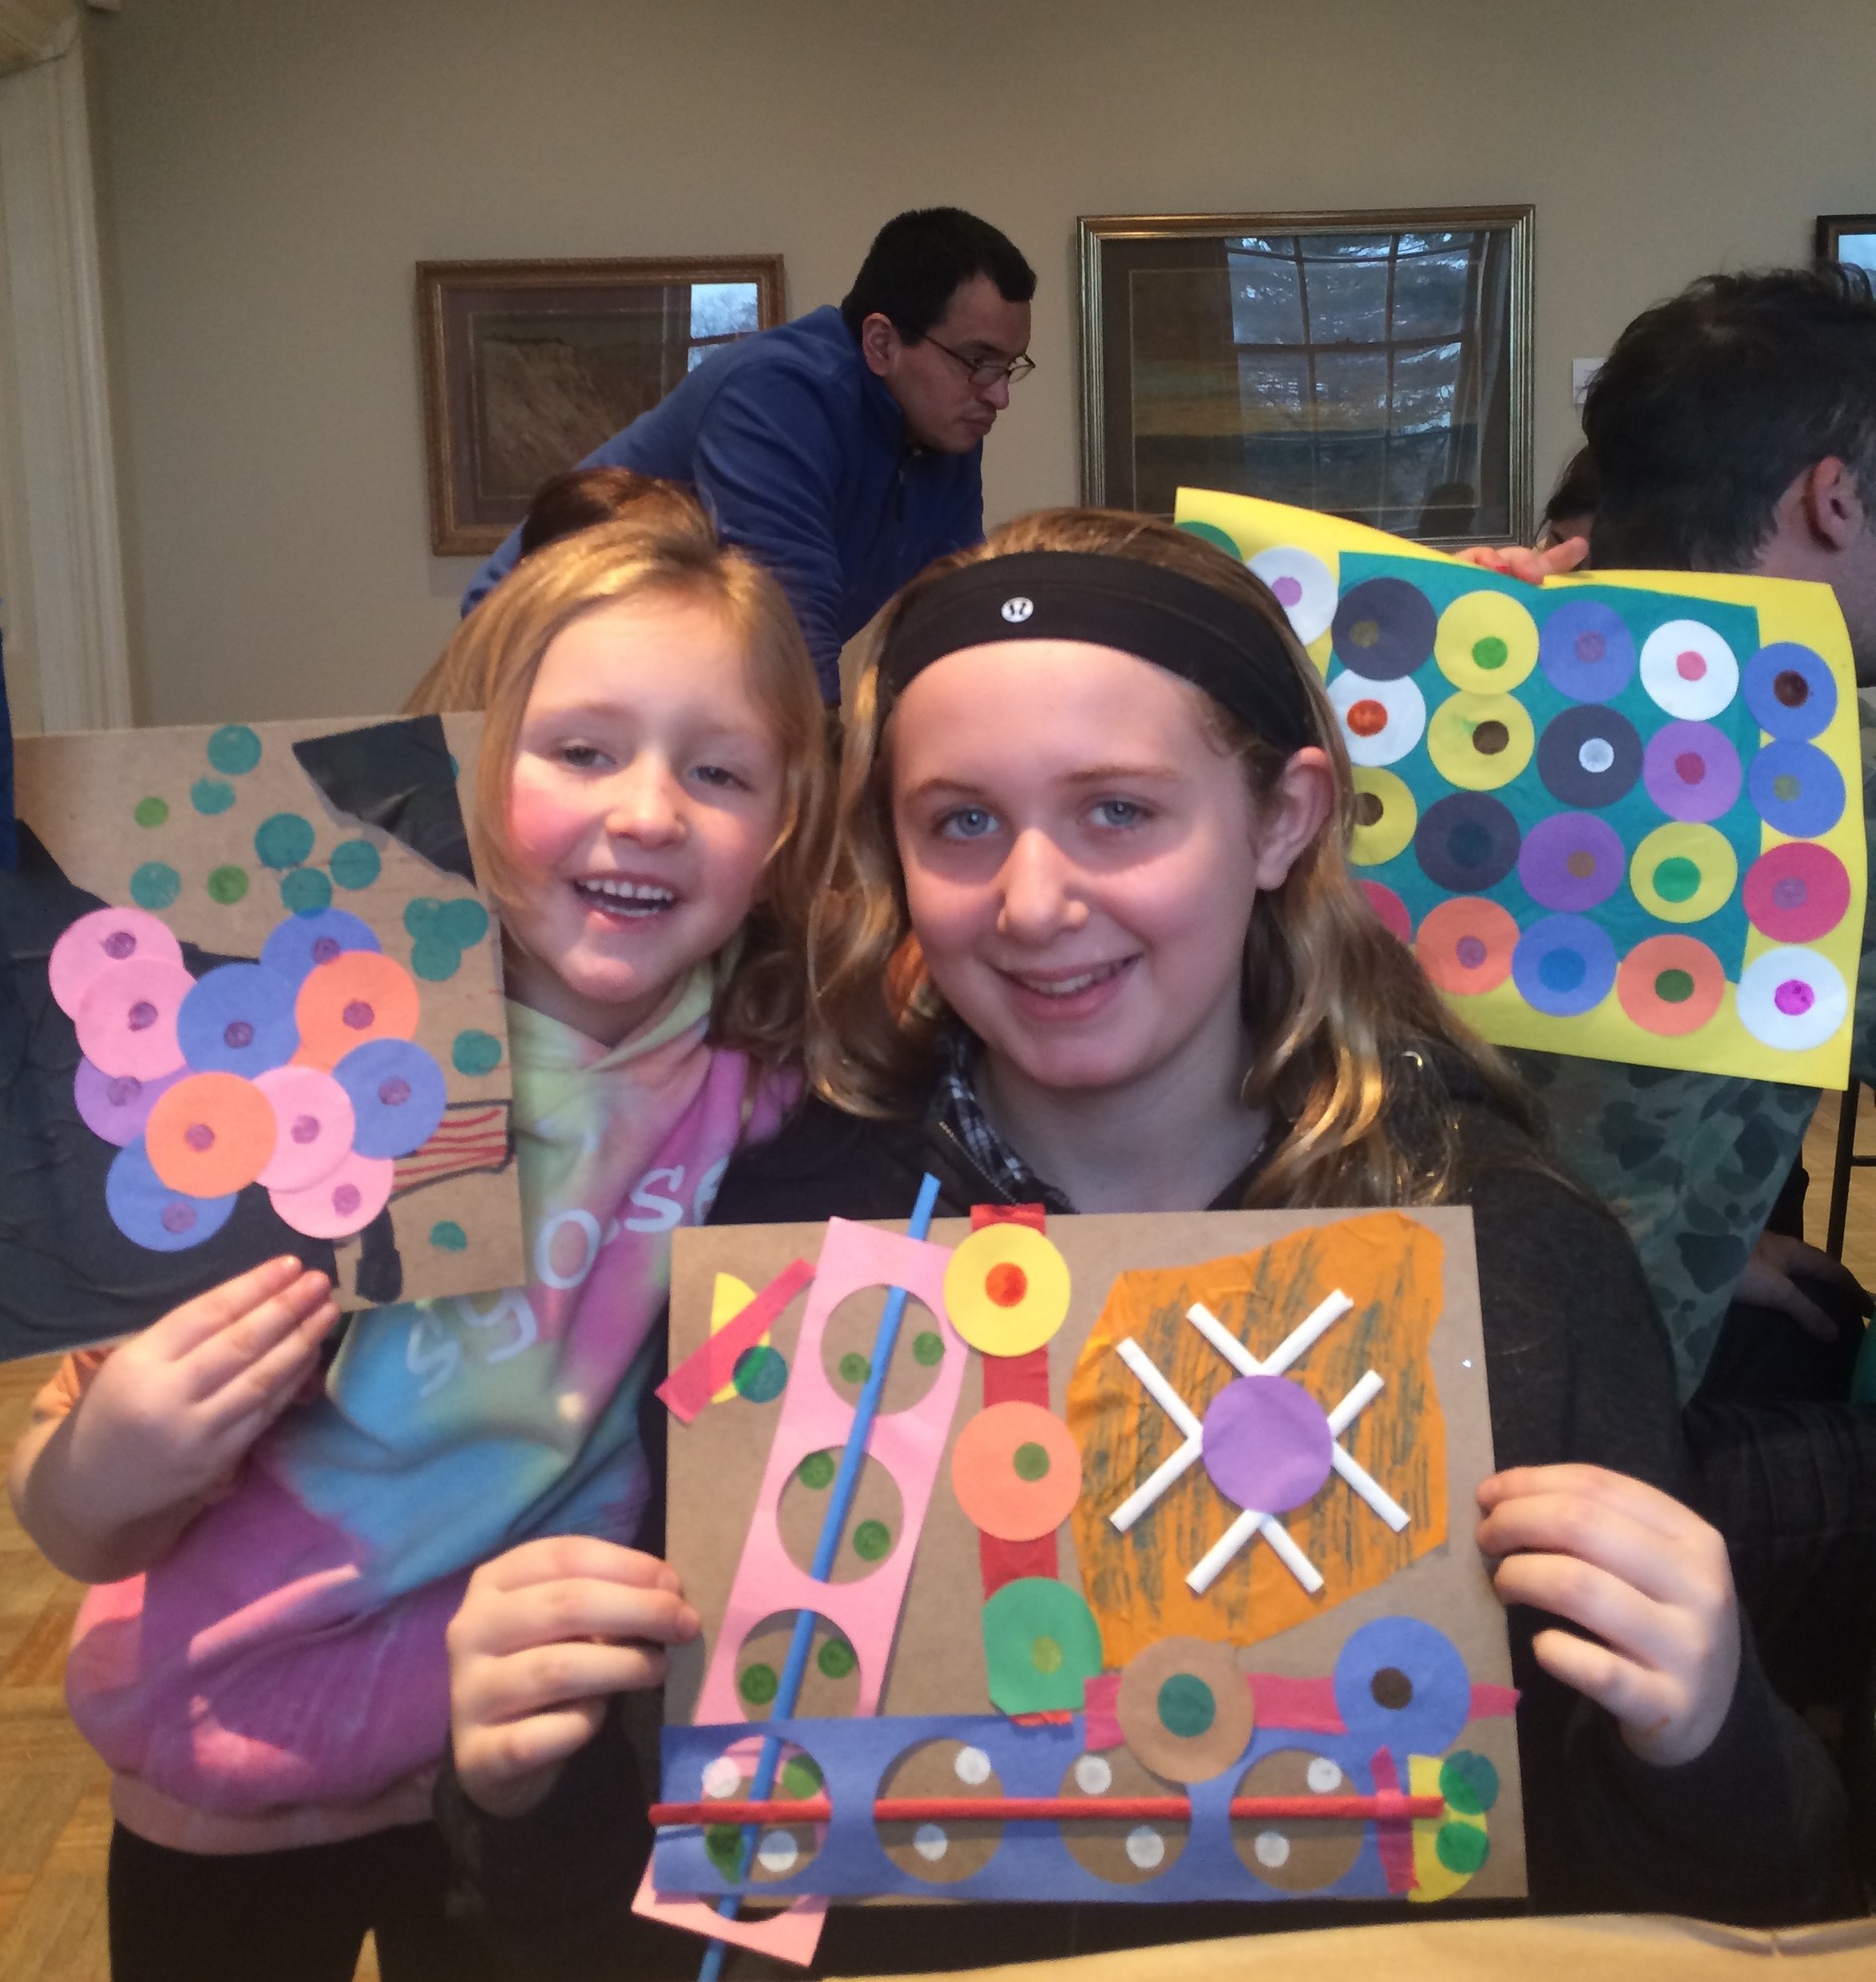 Kids can connect with the creative process at Nassau County Museum of Art during its Family Sunday program.